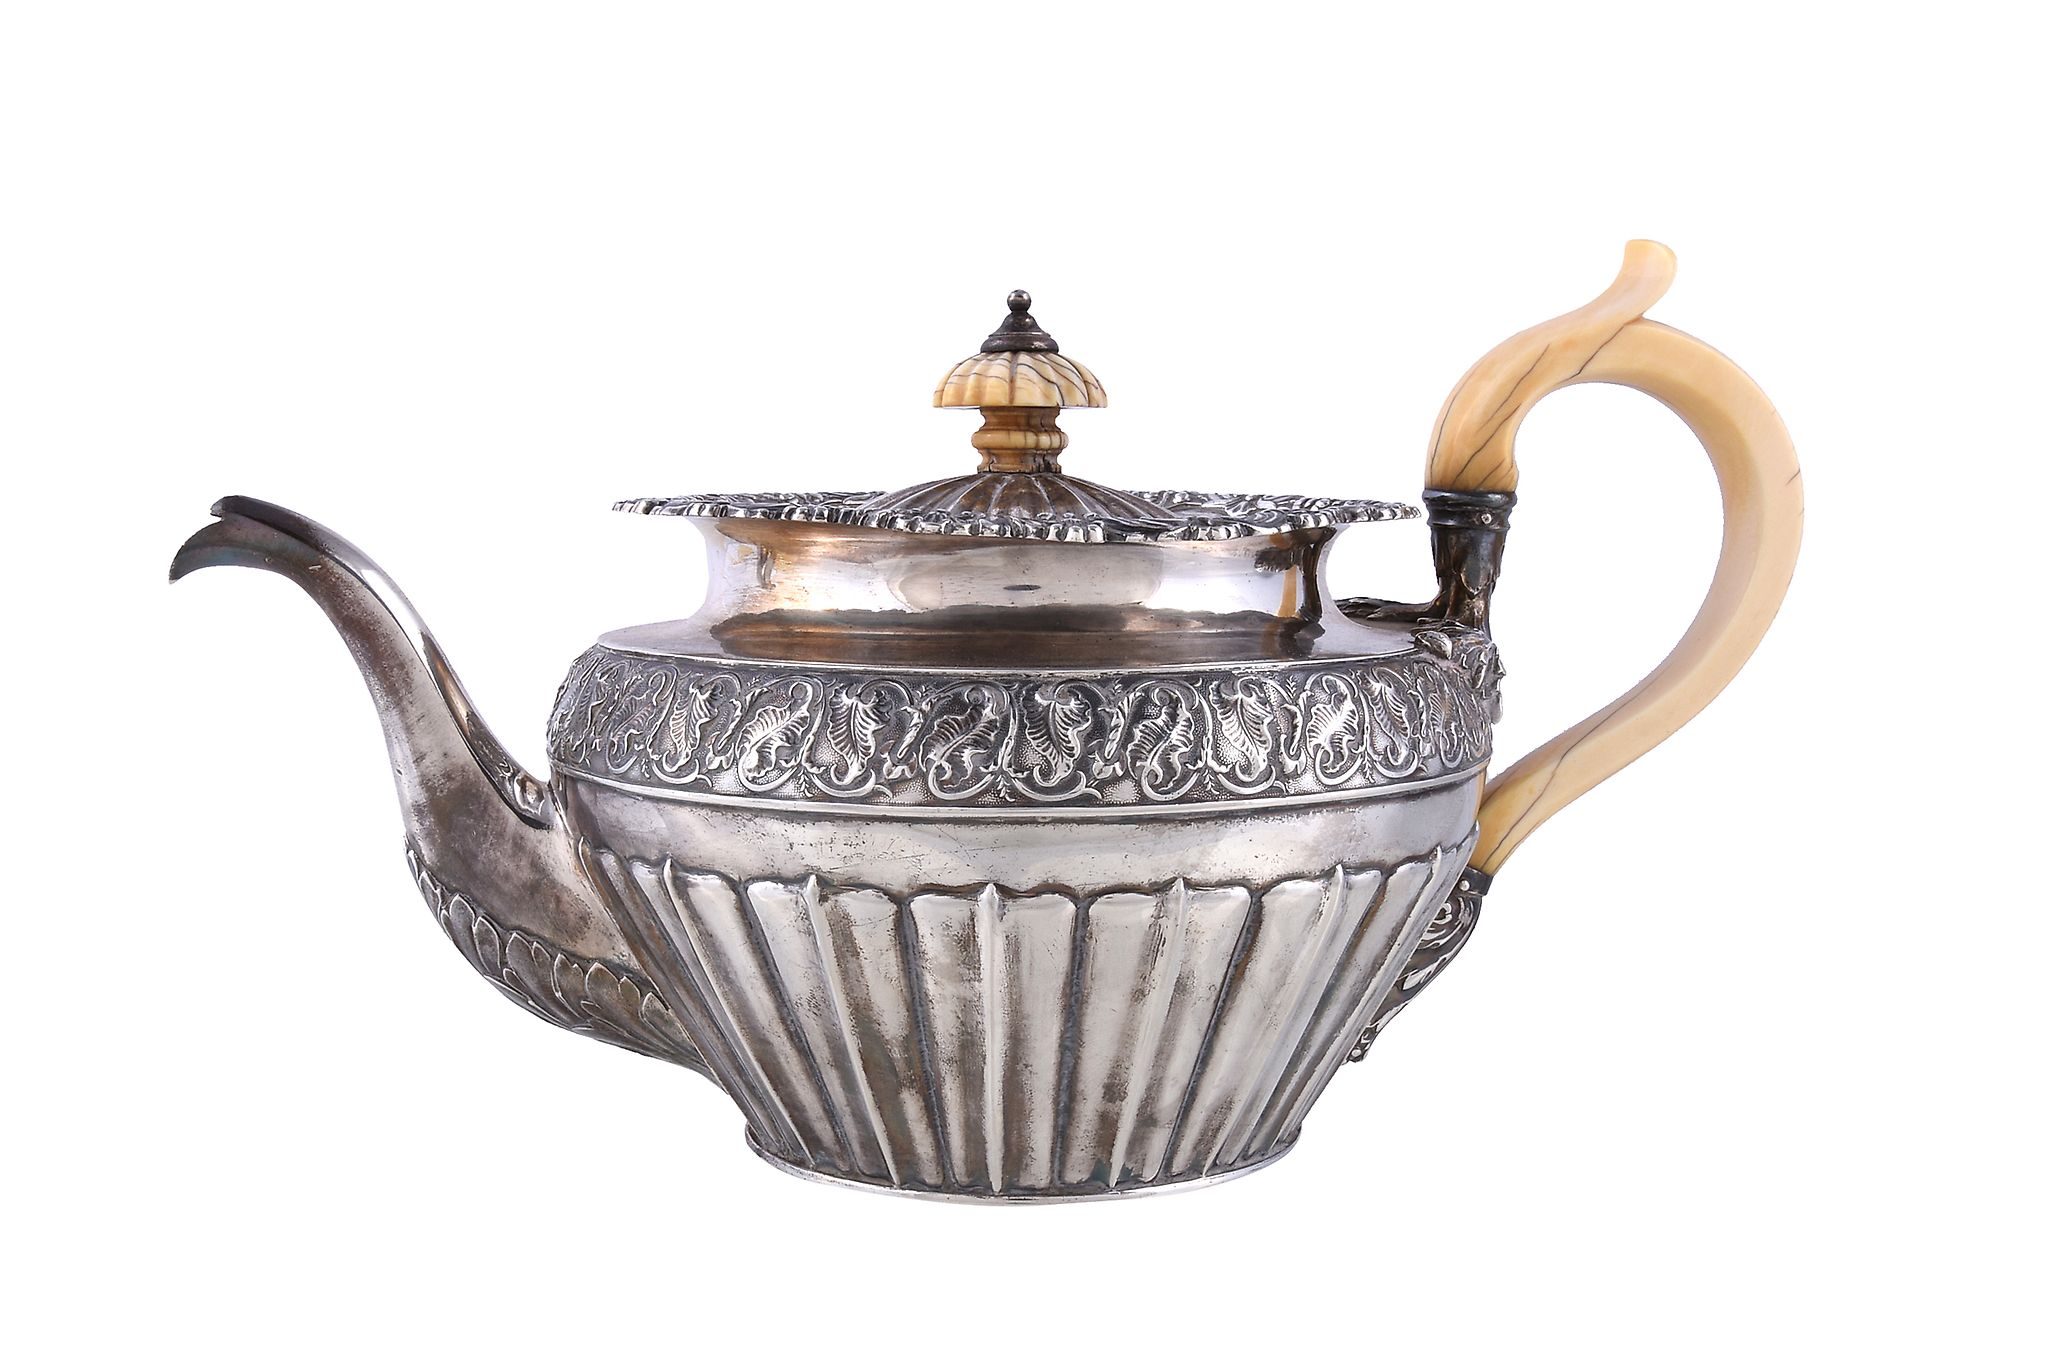 A George IV silver circular baluster tea pot, maker's mark obscured, London 1824, with an ivory